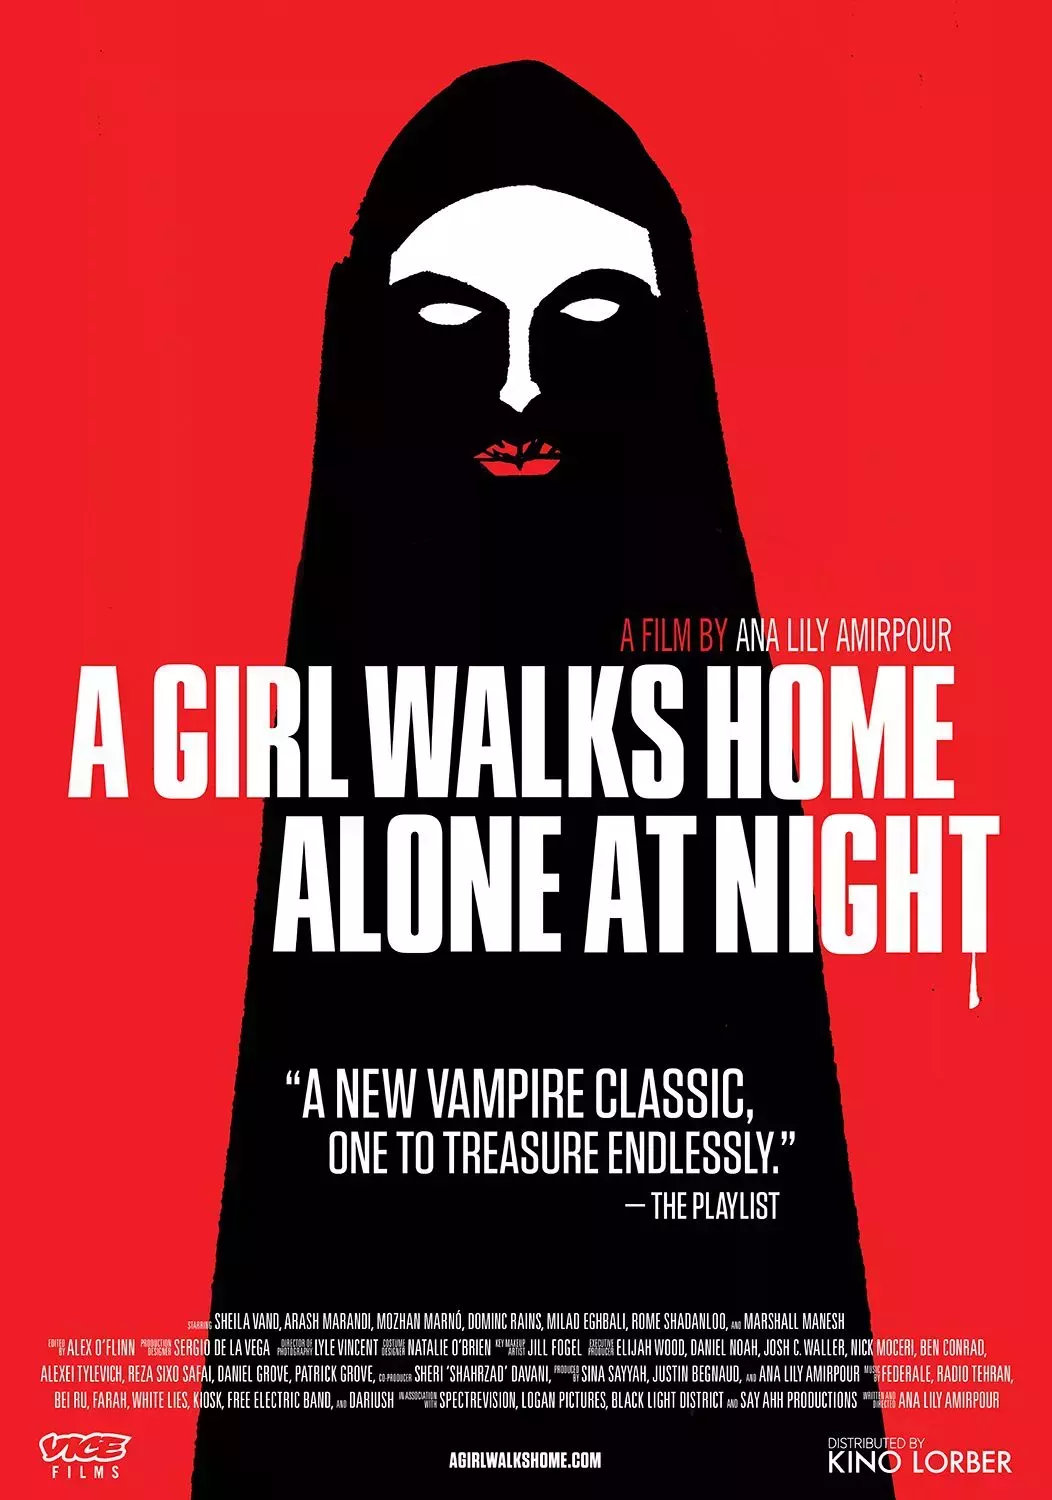 A Girl Walks Home Alone at Night Film Poster